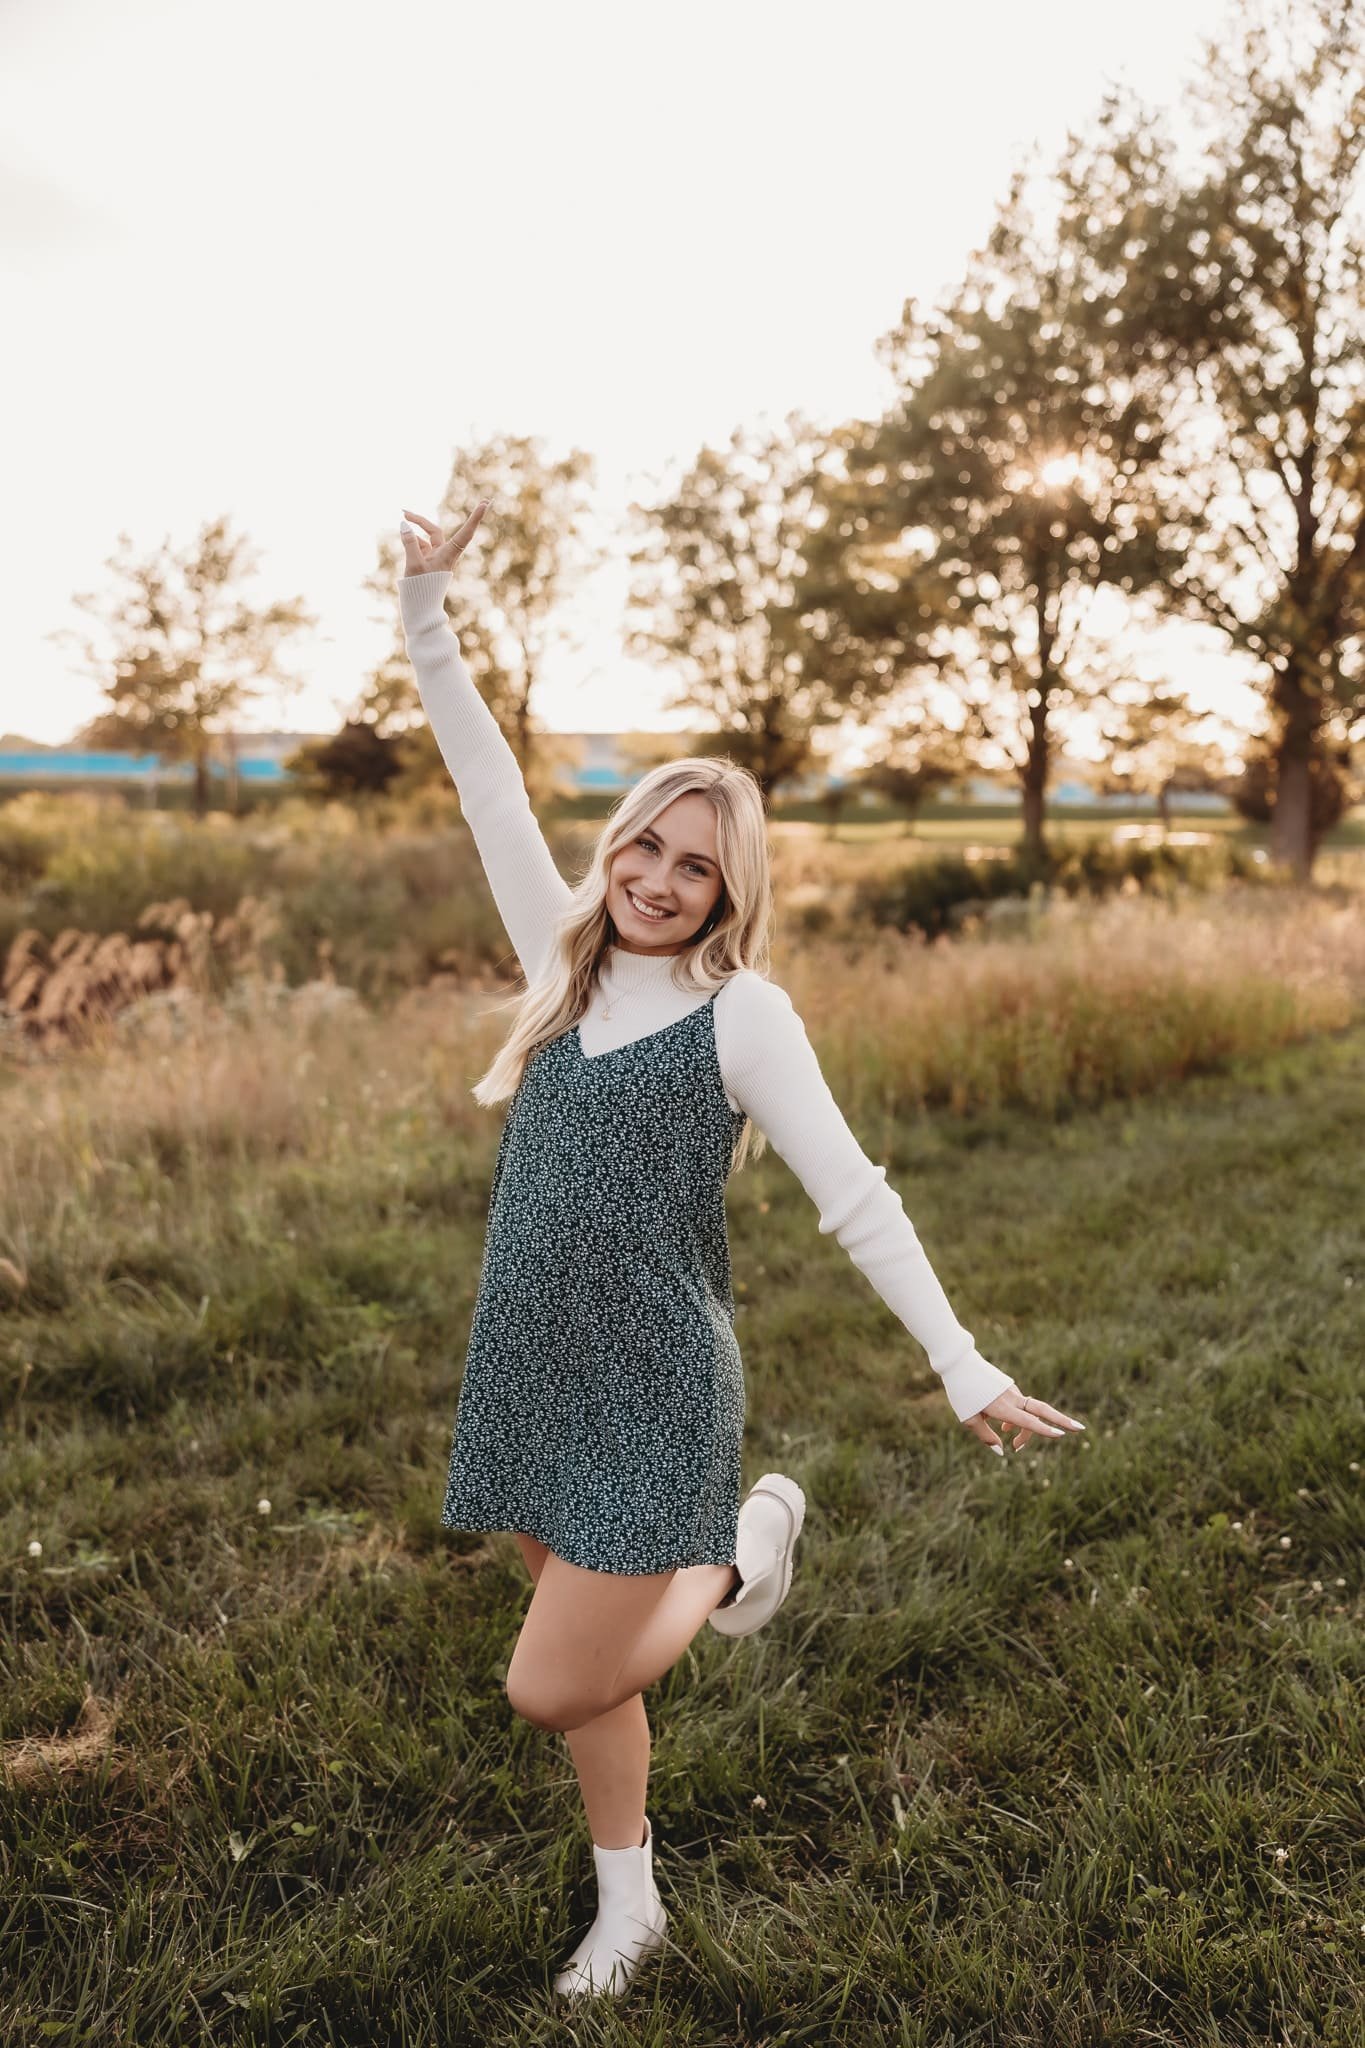  for senior photography, a young woman stands on one leg with her arms in the air in an open field  